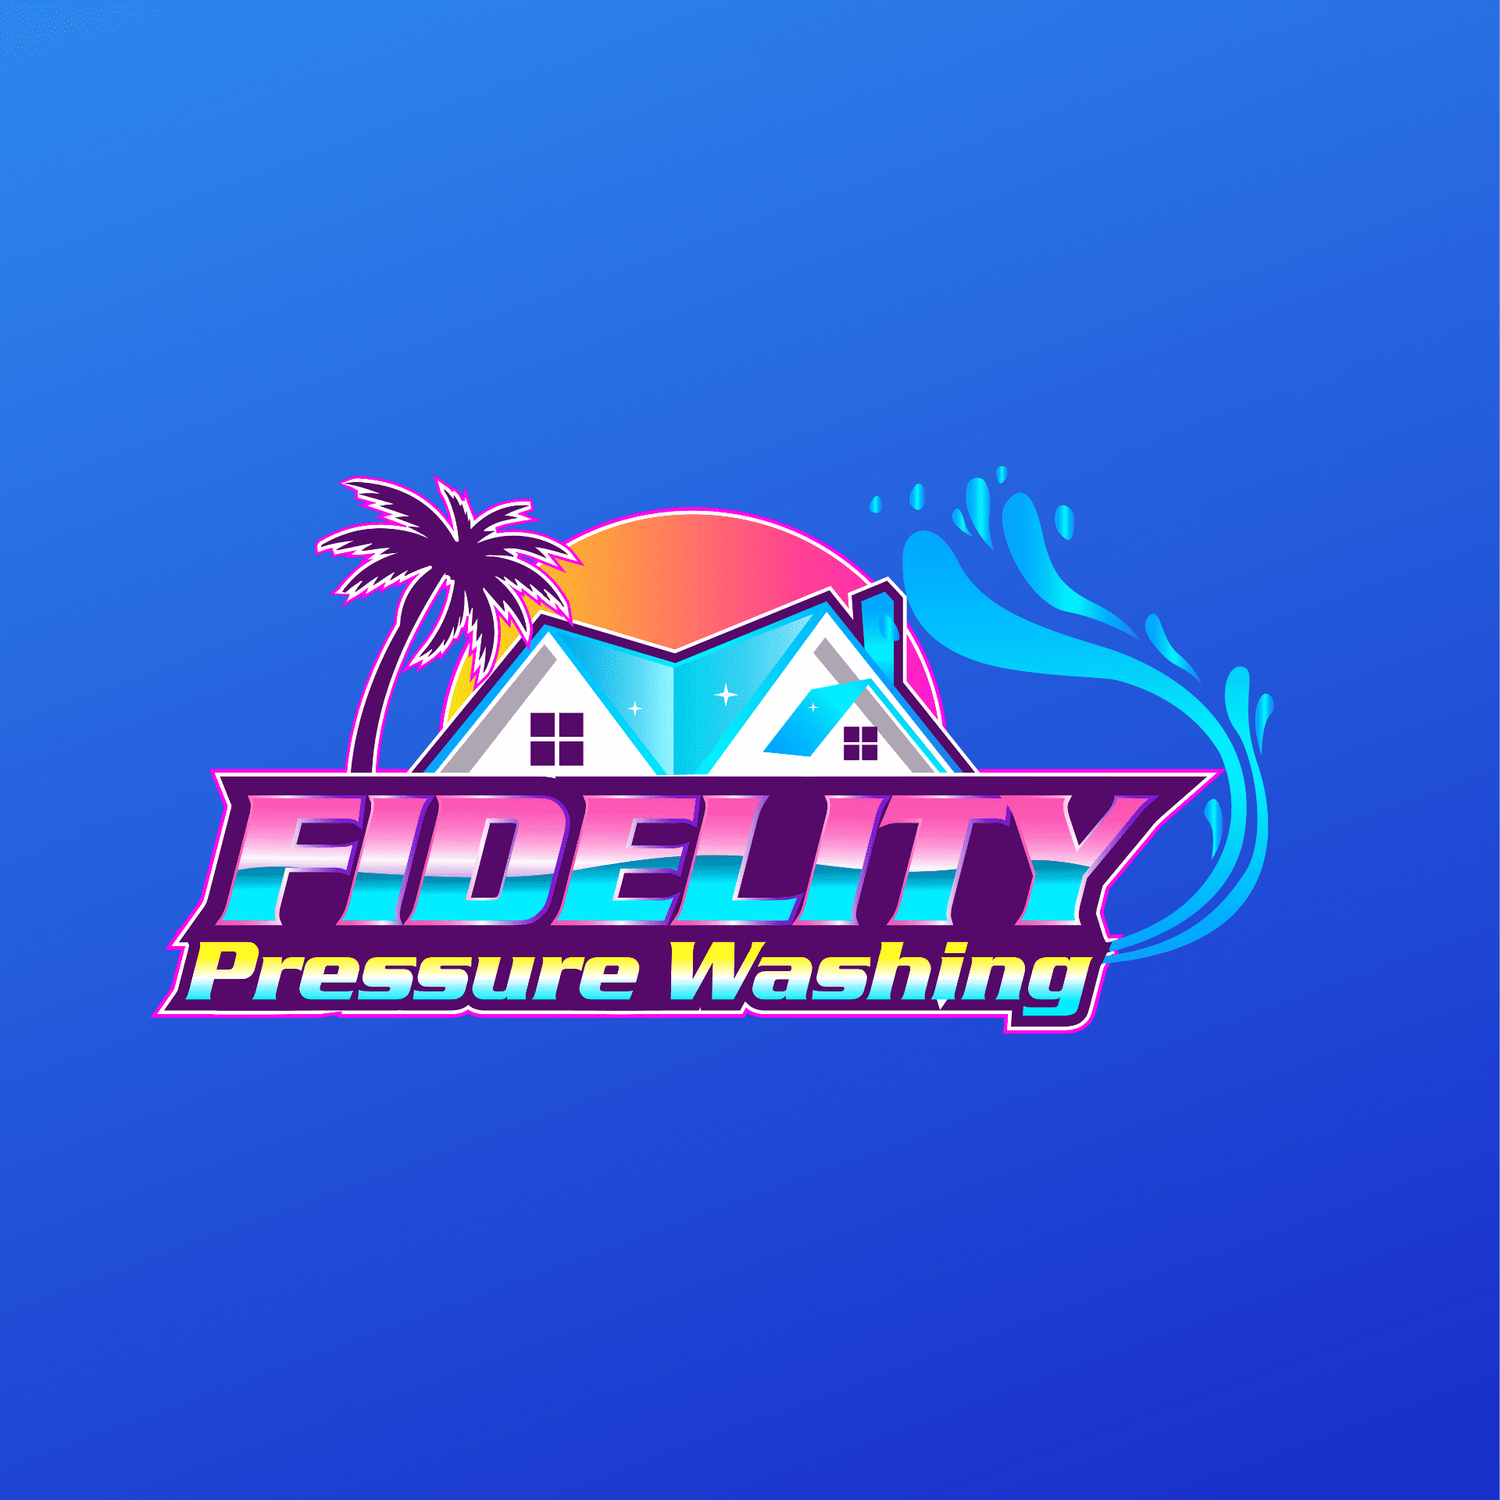 Fidelity Pressure Washing Sarasota: Top-Rated Roof Cleaning &amp; Exterior Wash Services in Sarasota &amp; Lakewood Ranch